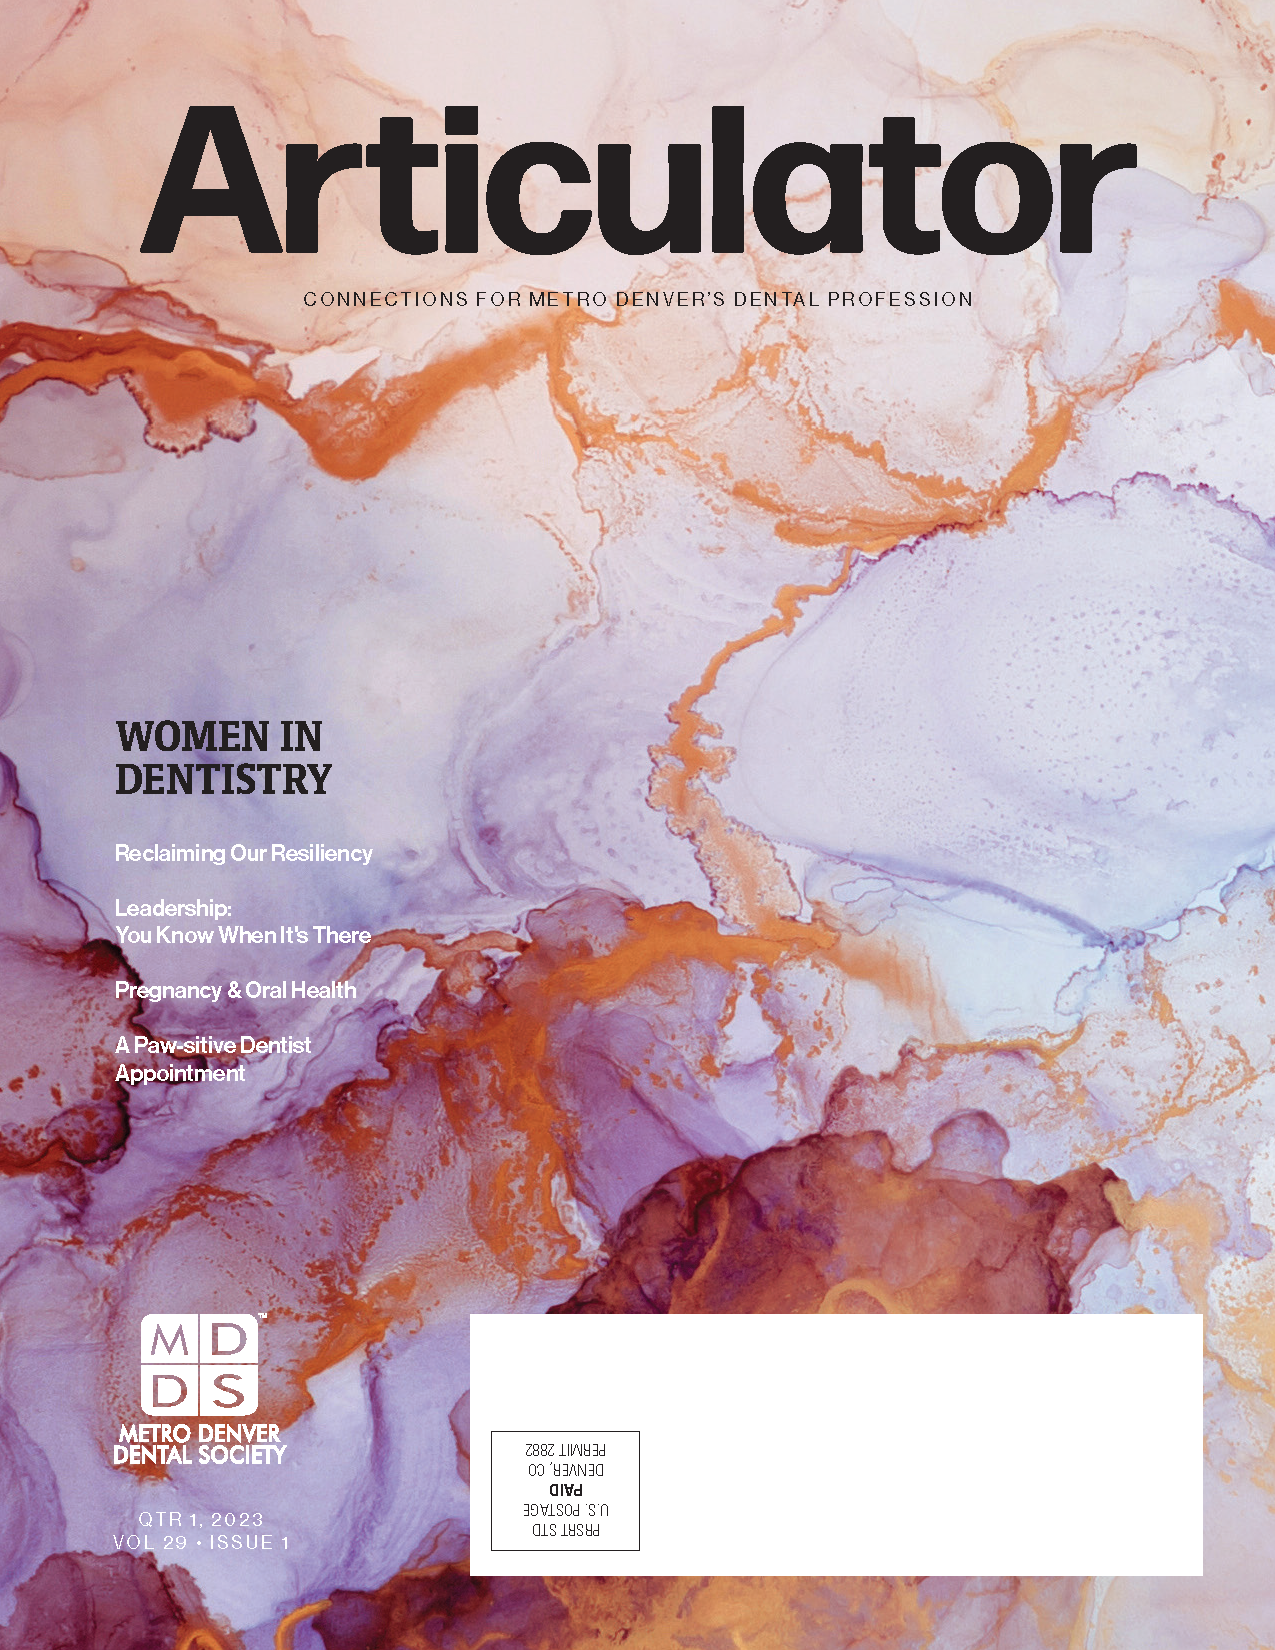 Cover of the Metro Denver Dental Society's Articulator magazine with purple and orange marble effect across the entire cover.